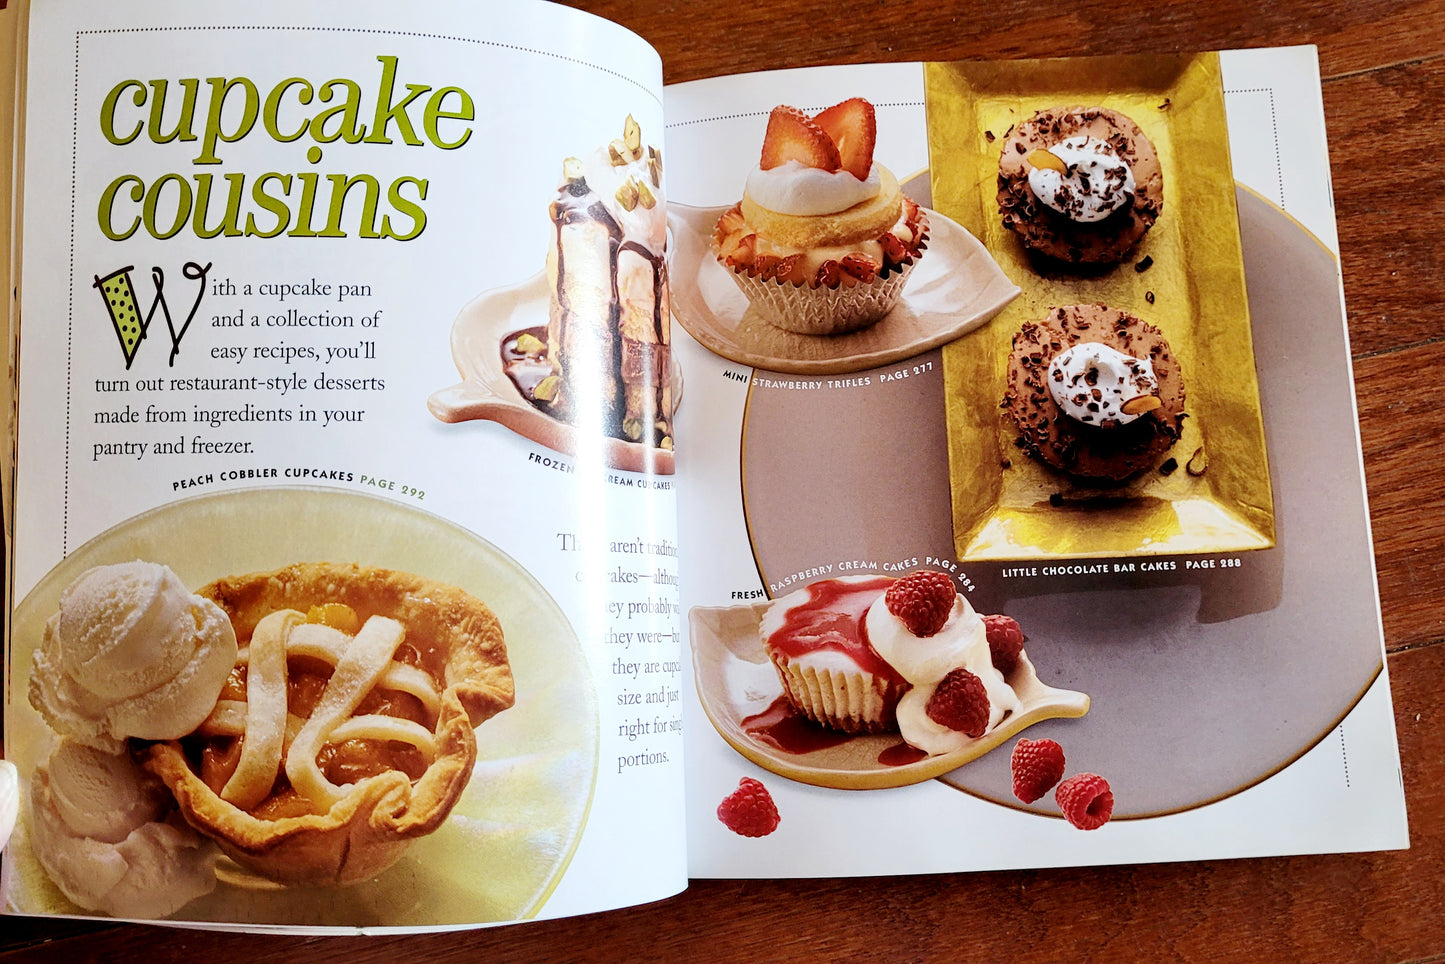 "CUPCAKES! From the Cake Doctor"  by Anne Byrn Cupcake Magic